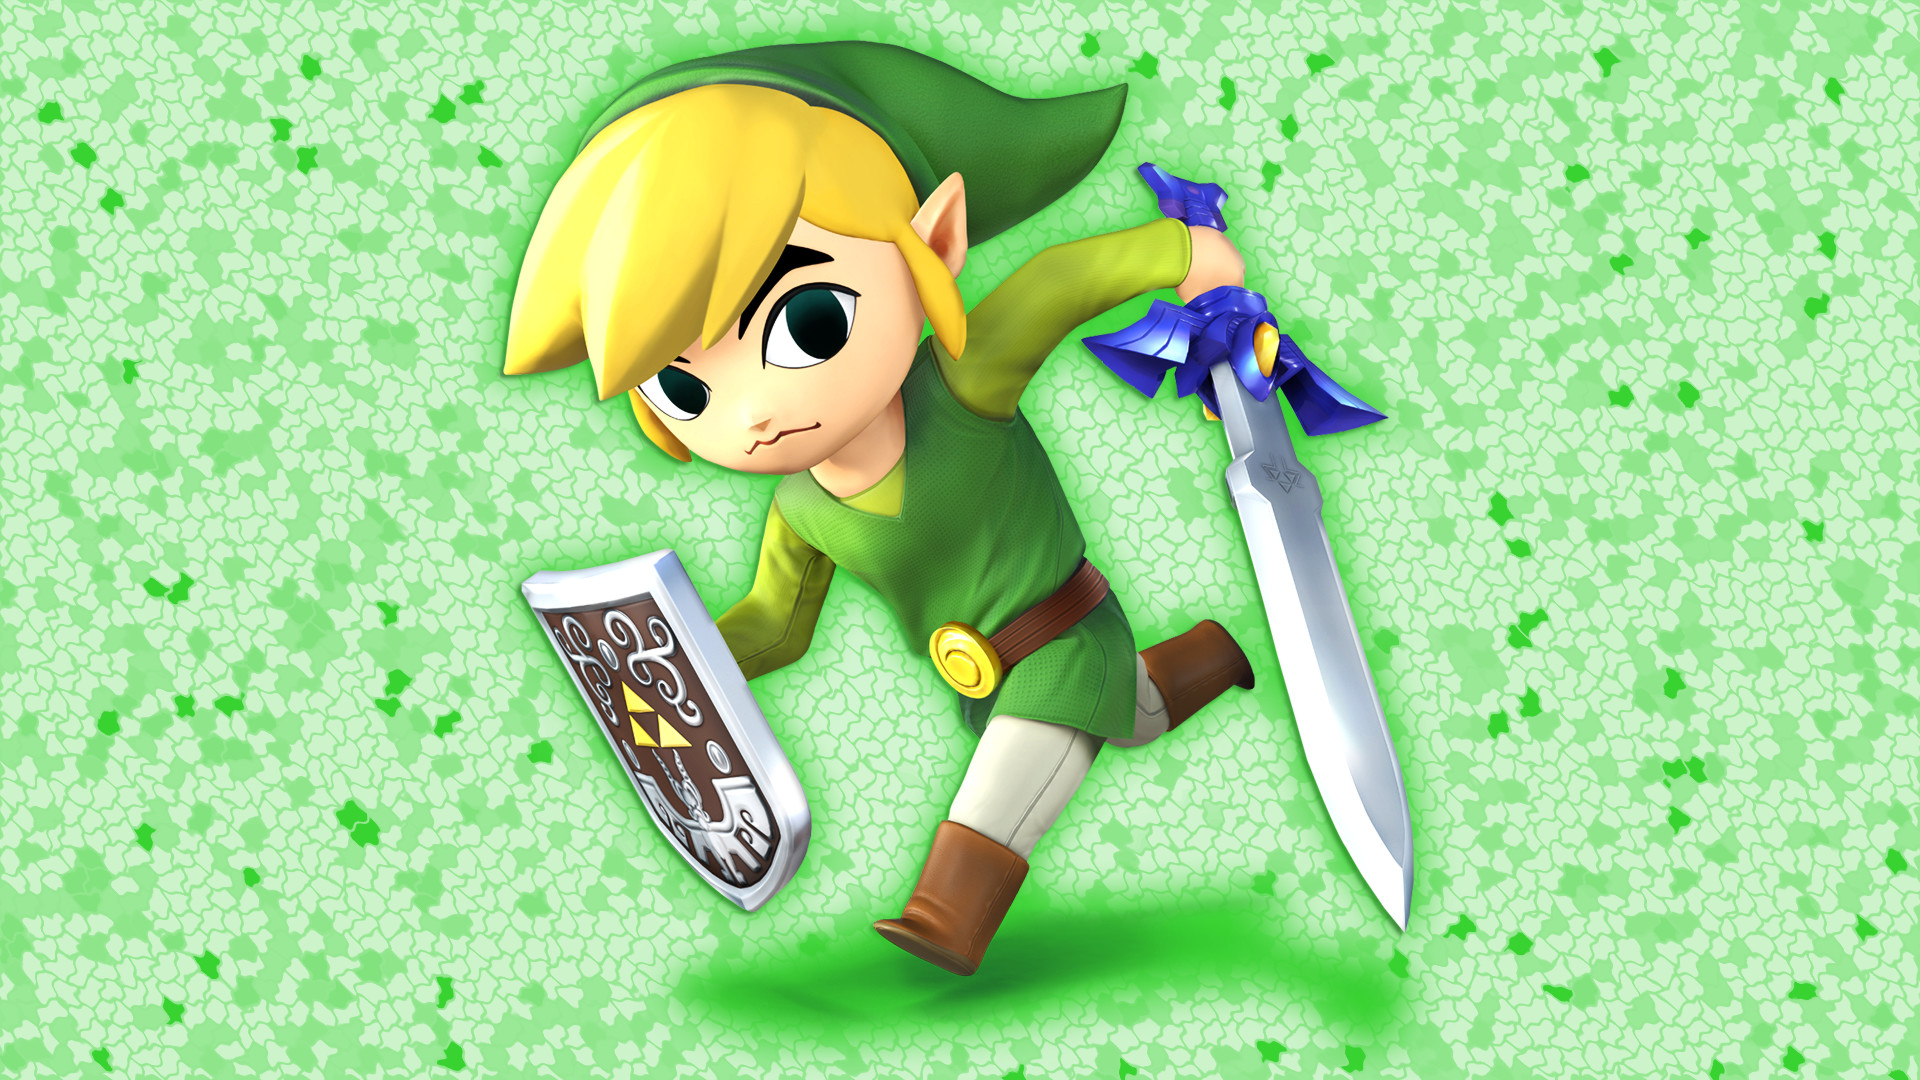 100 Quality HD Toon Link Cool Toon Link Backgrounds